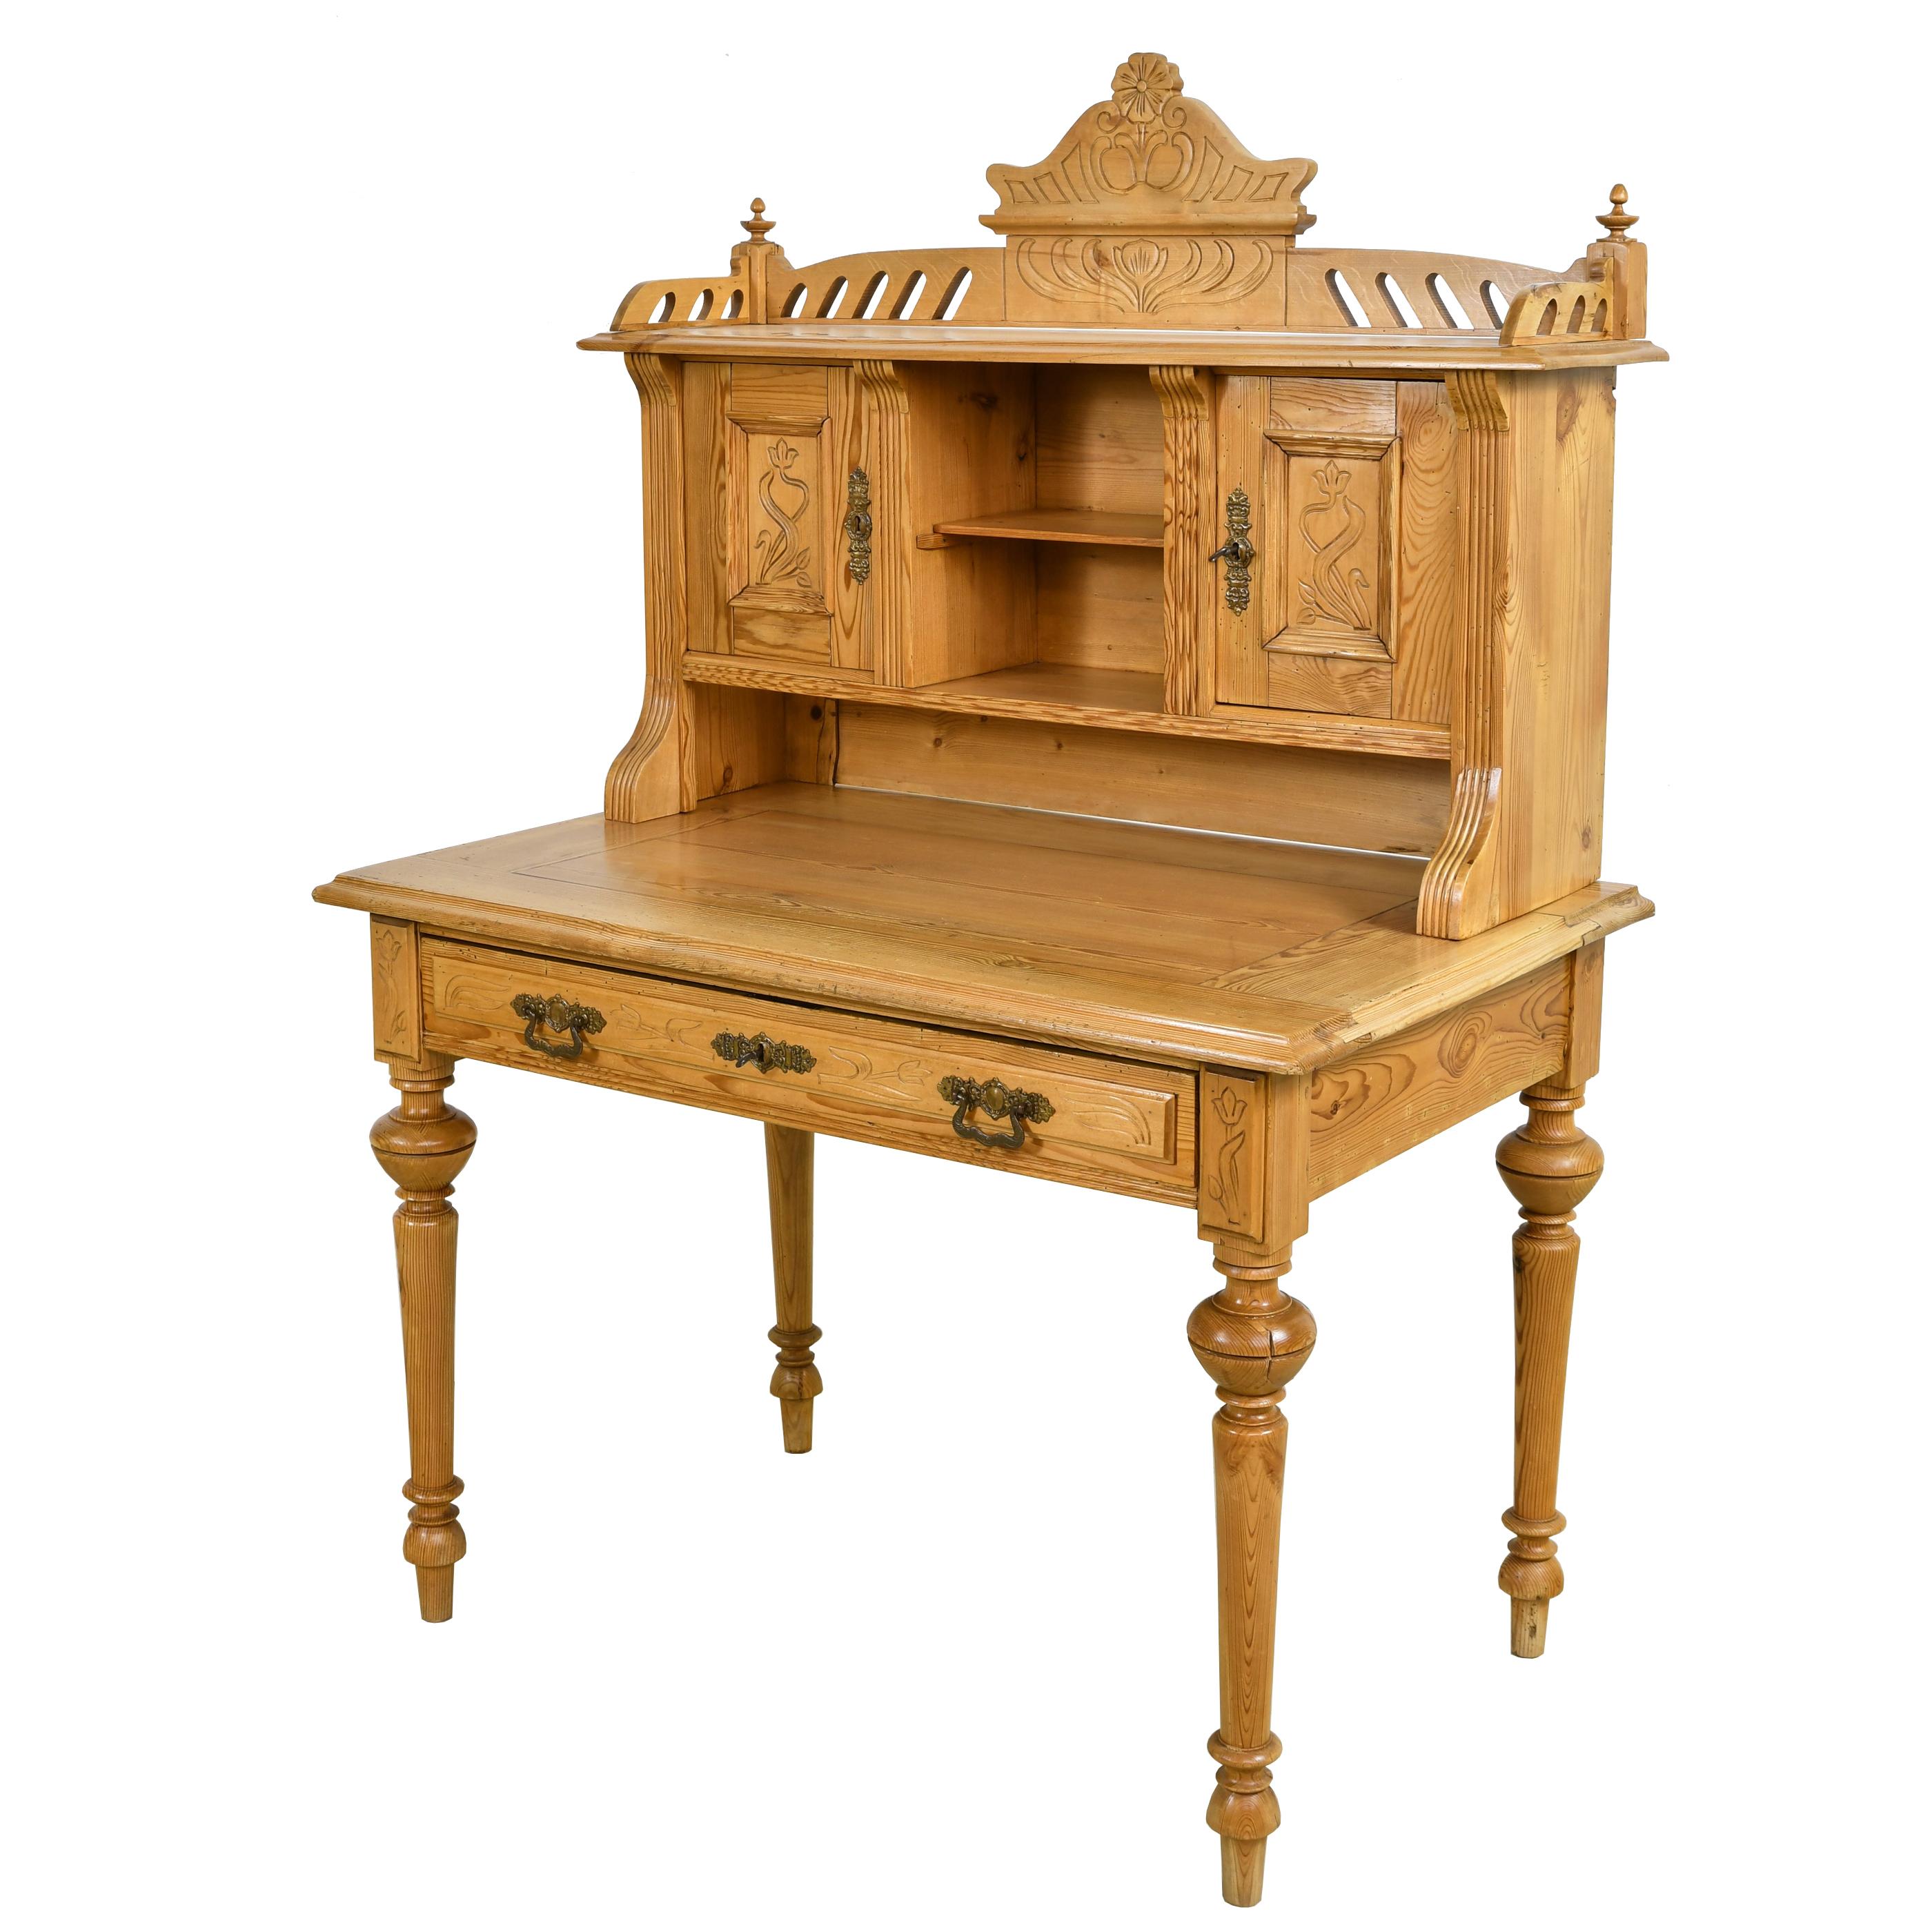 A lovely and well-crafted Jugendstil desk in pine with upper cabinet resting over a writing table offering open shelving & closed storage. Top has a carved bonnet with stylized flowers and open carvings with turned finials on the corners. Writing